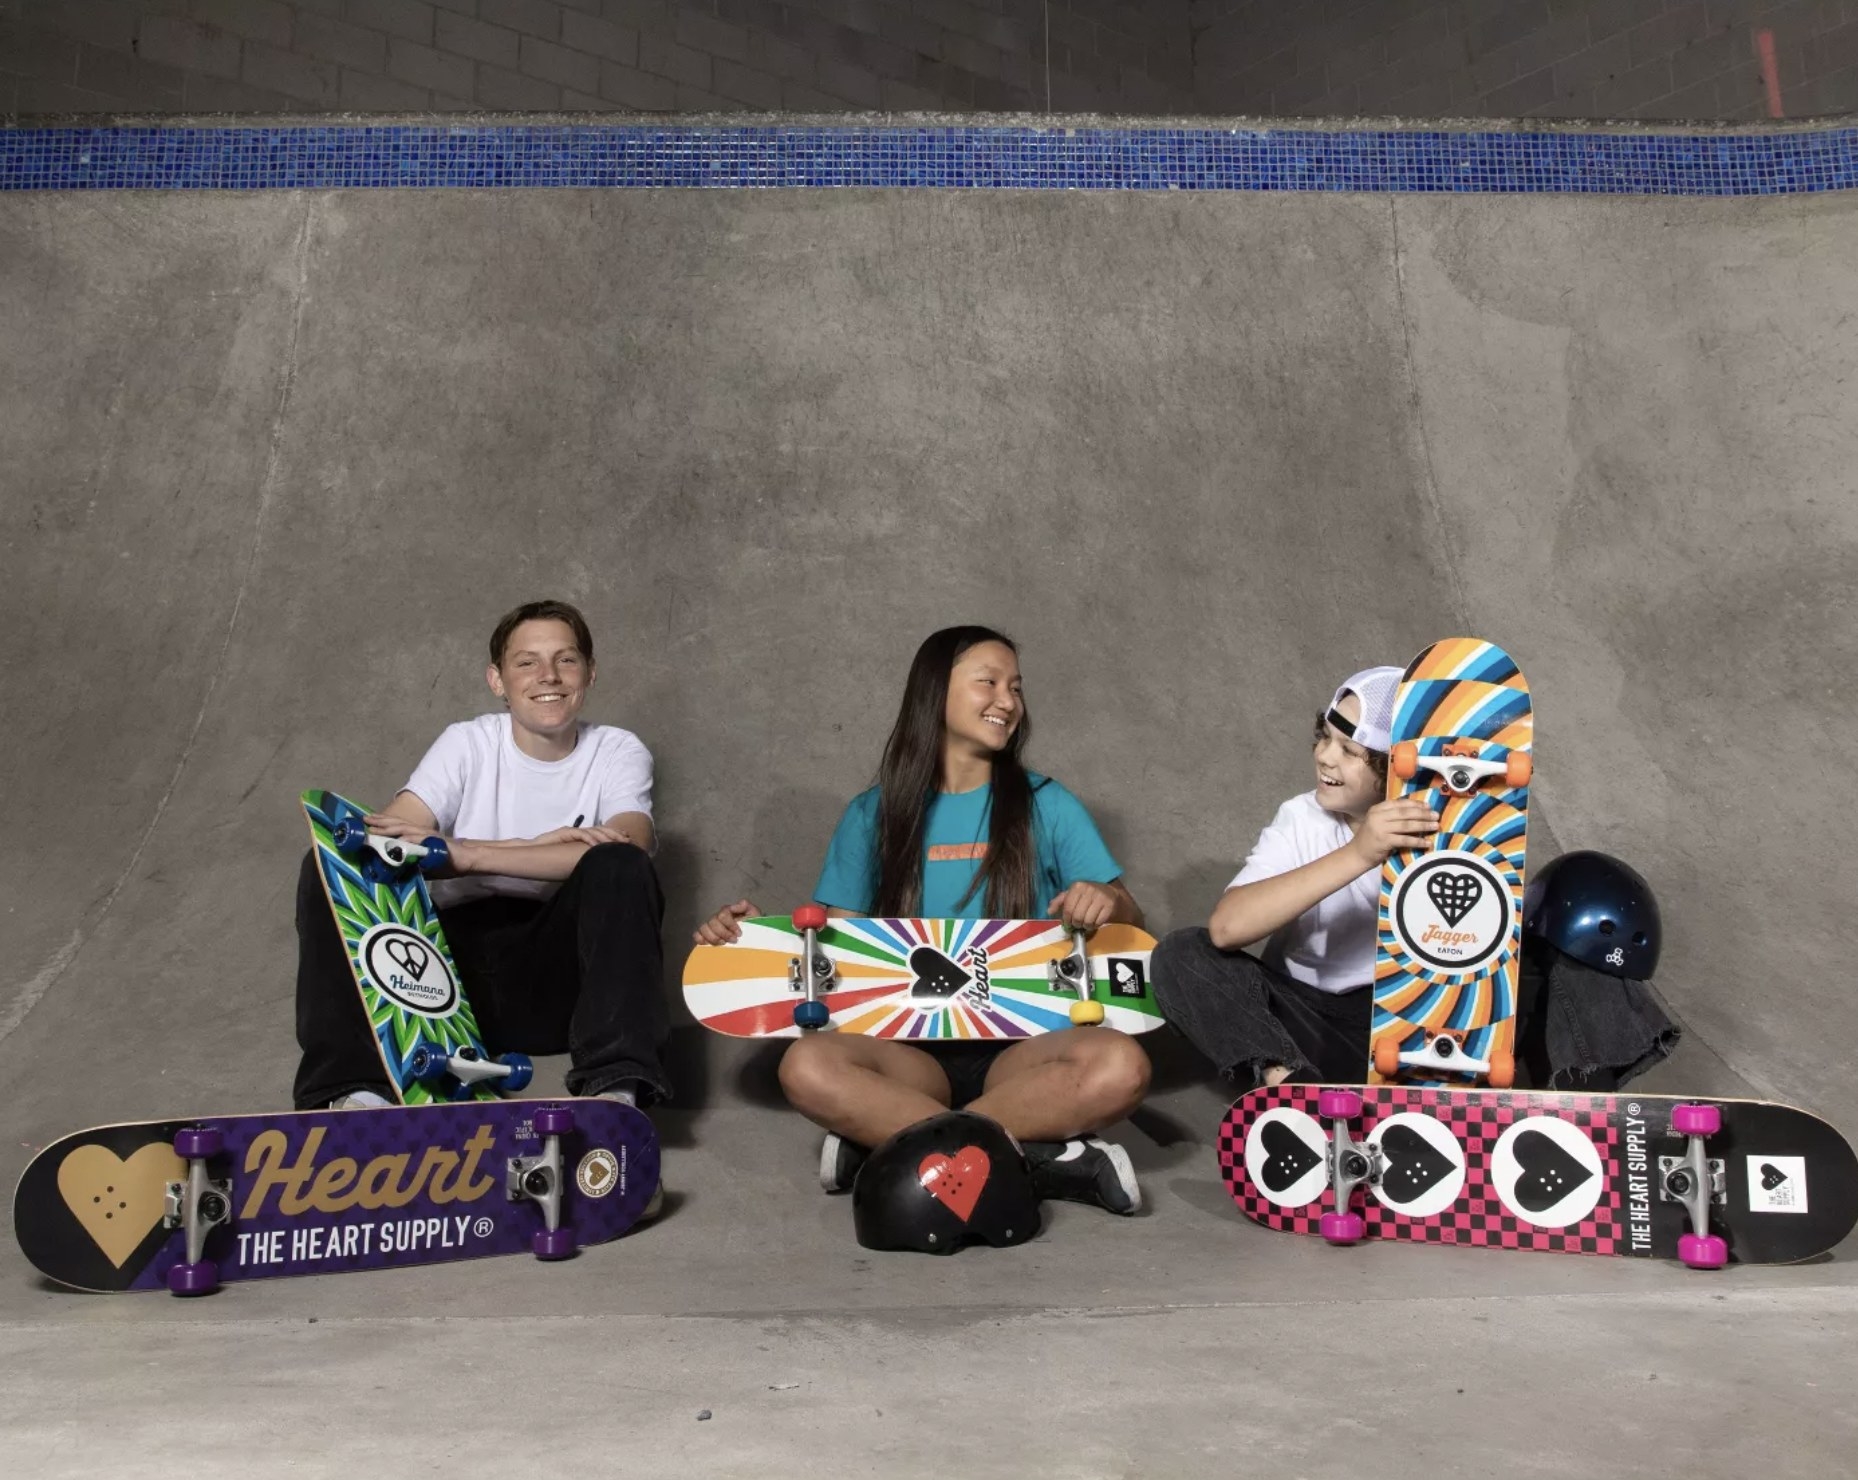 Three kids with their Heart Supply skateboards.